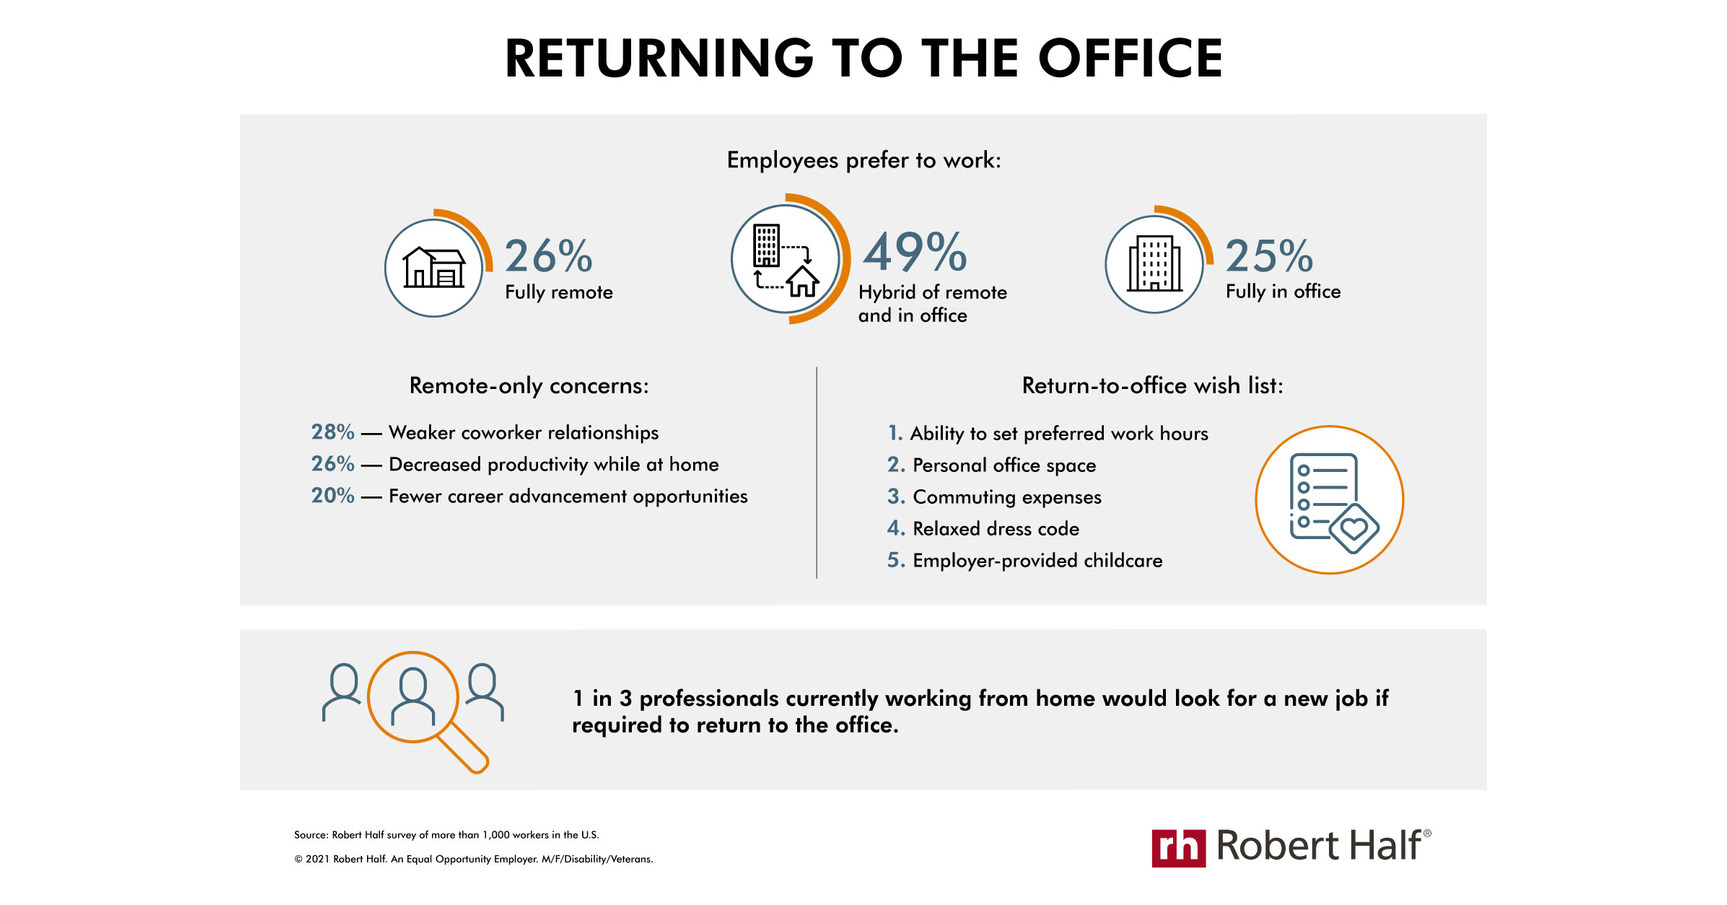 Returning to the office: what this means for tech workers